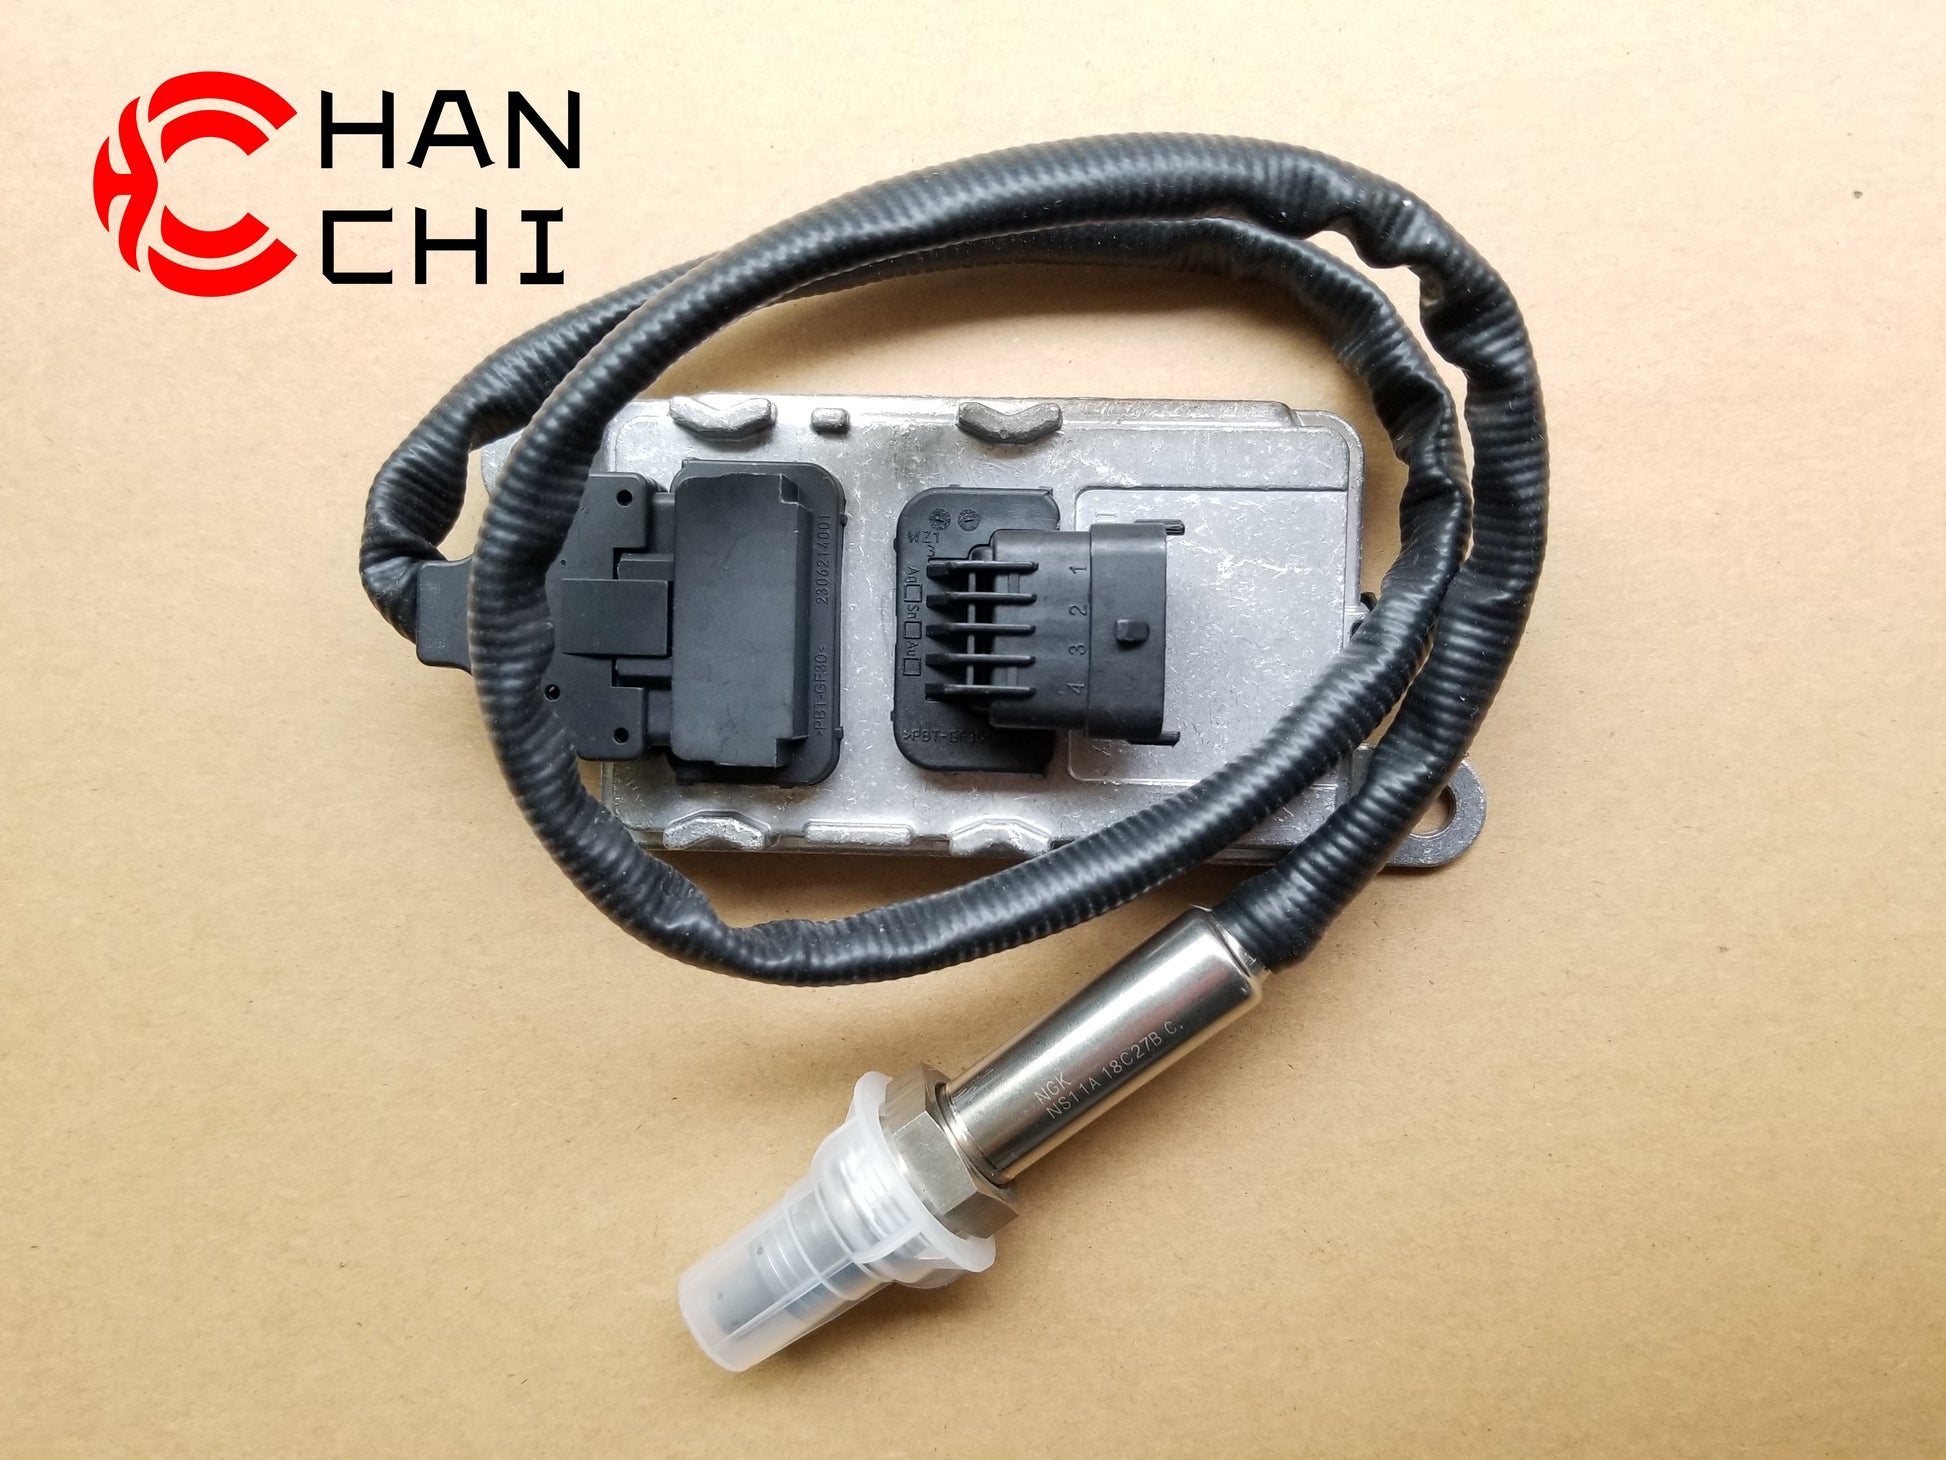 OEM: 5WK97371 22827993Material: ABS metalColor: black silverOrigin: Made in ChinaWeight: 400gPacking List: 1* Nitrogen oxide sensor NOx More ServiceWe can provide OEM Manufacturing serviceWe can Be your one-step solution for Auto PartsWe can provide technical scheme for you Feel Free to Contact Us, We will get back to you as soon as possible.